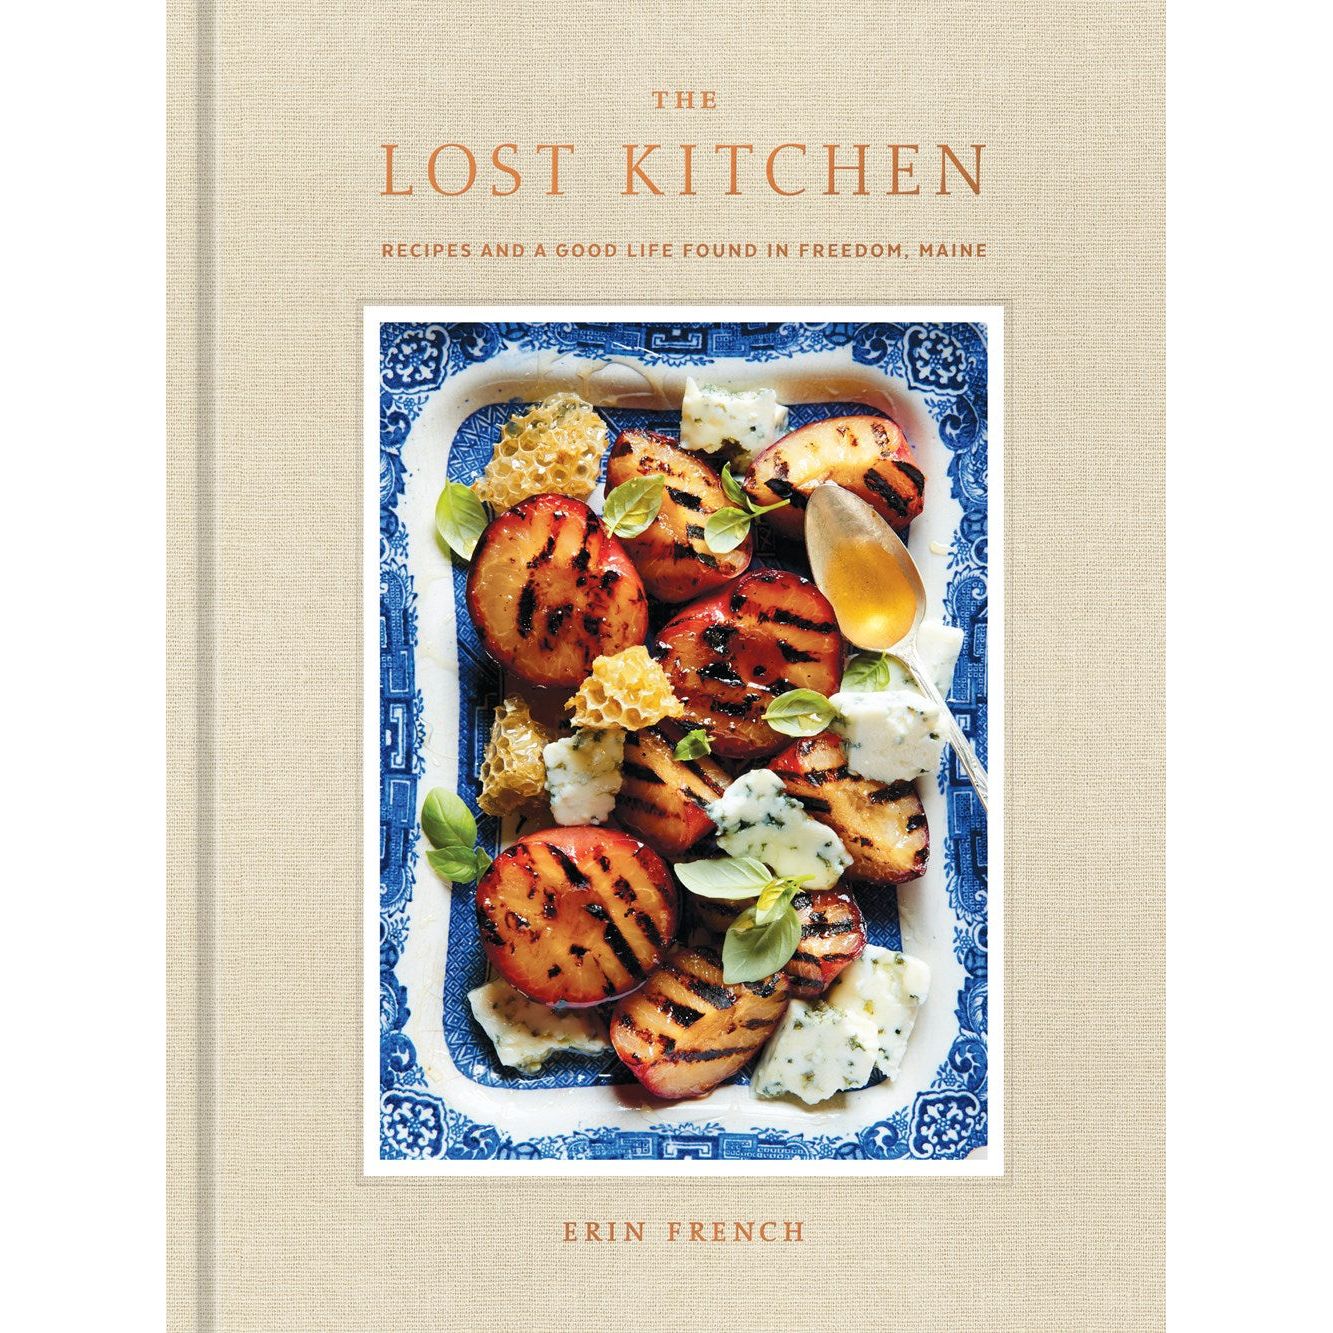 The Lost Kitchen (Erin French)